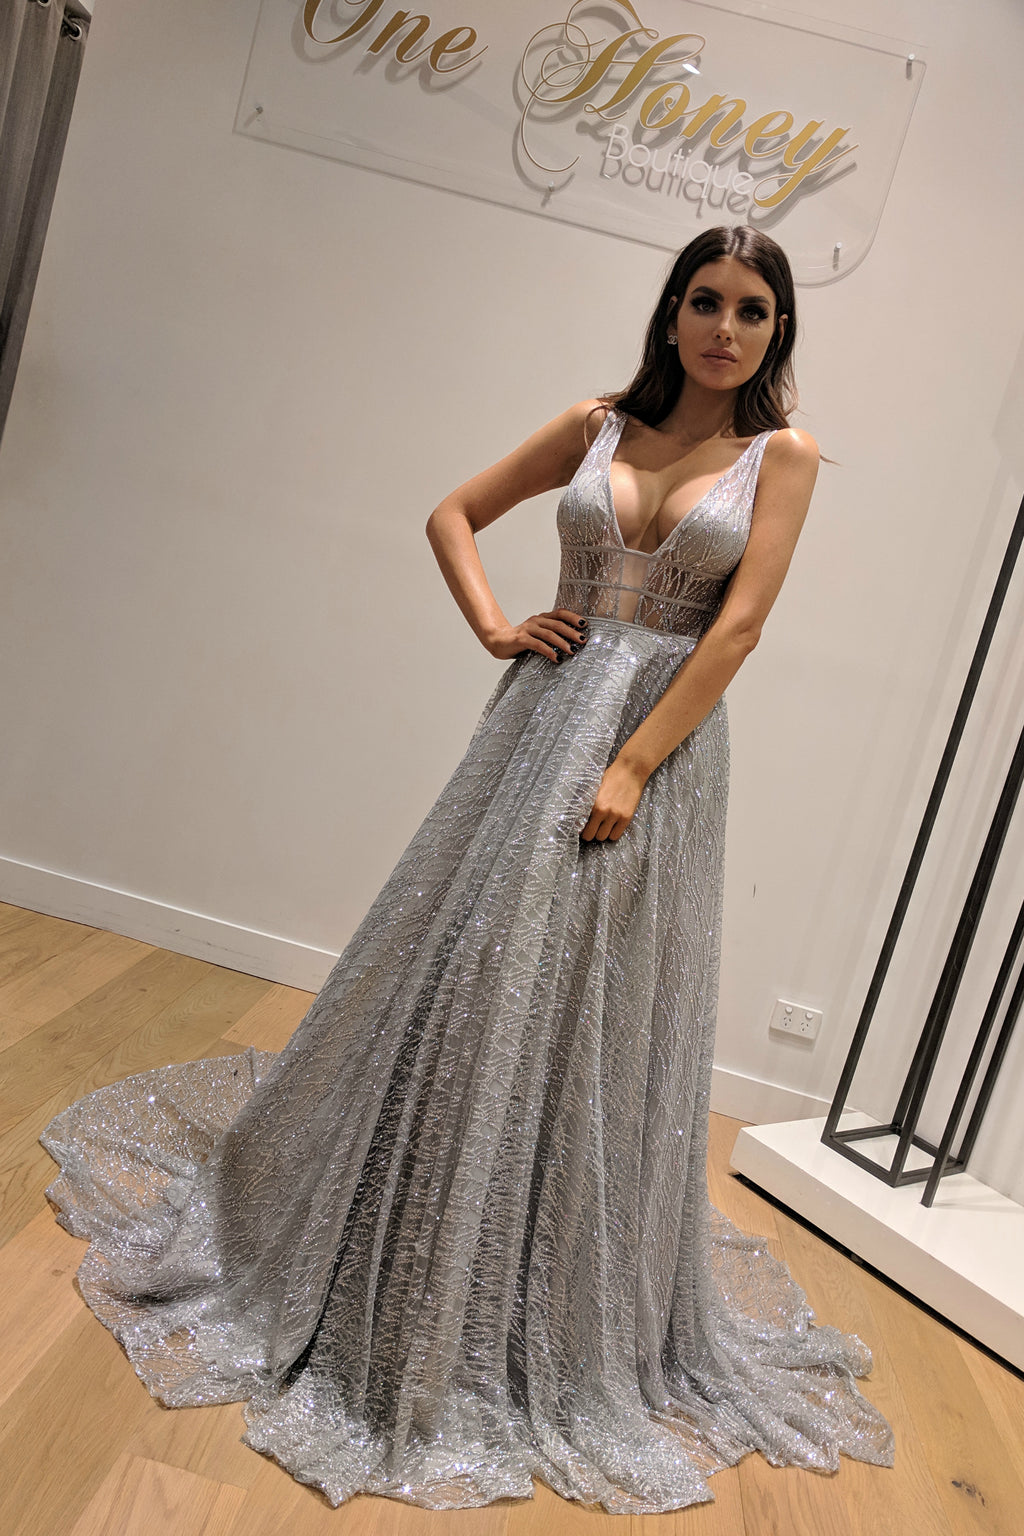 Shop Dazzling Silver Dresses right now! - The Dress Outlet